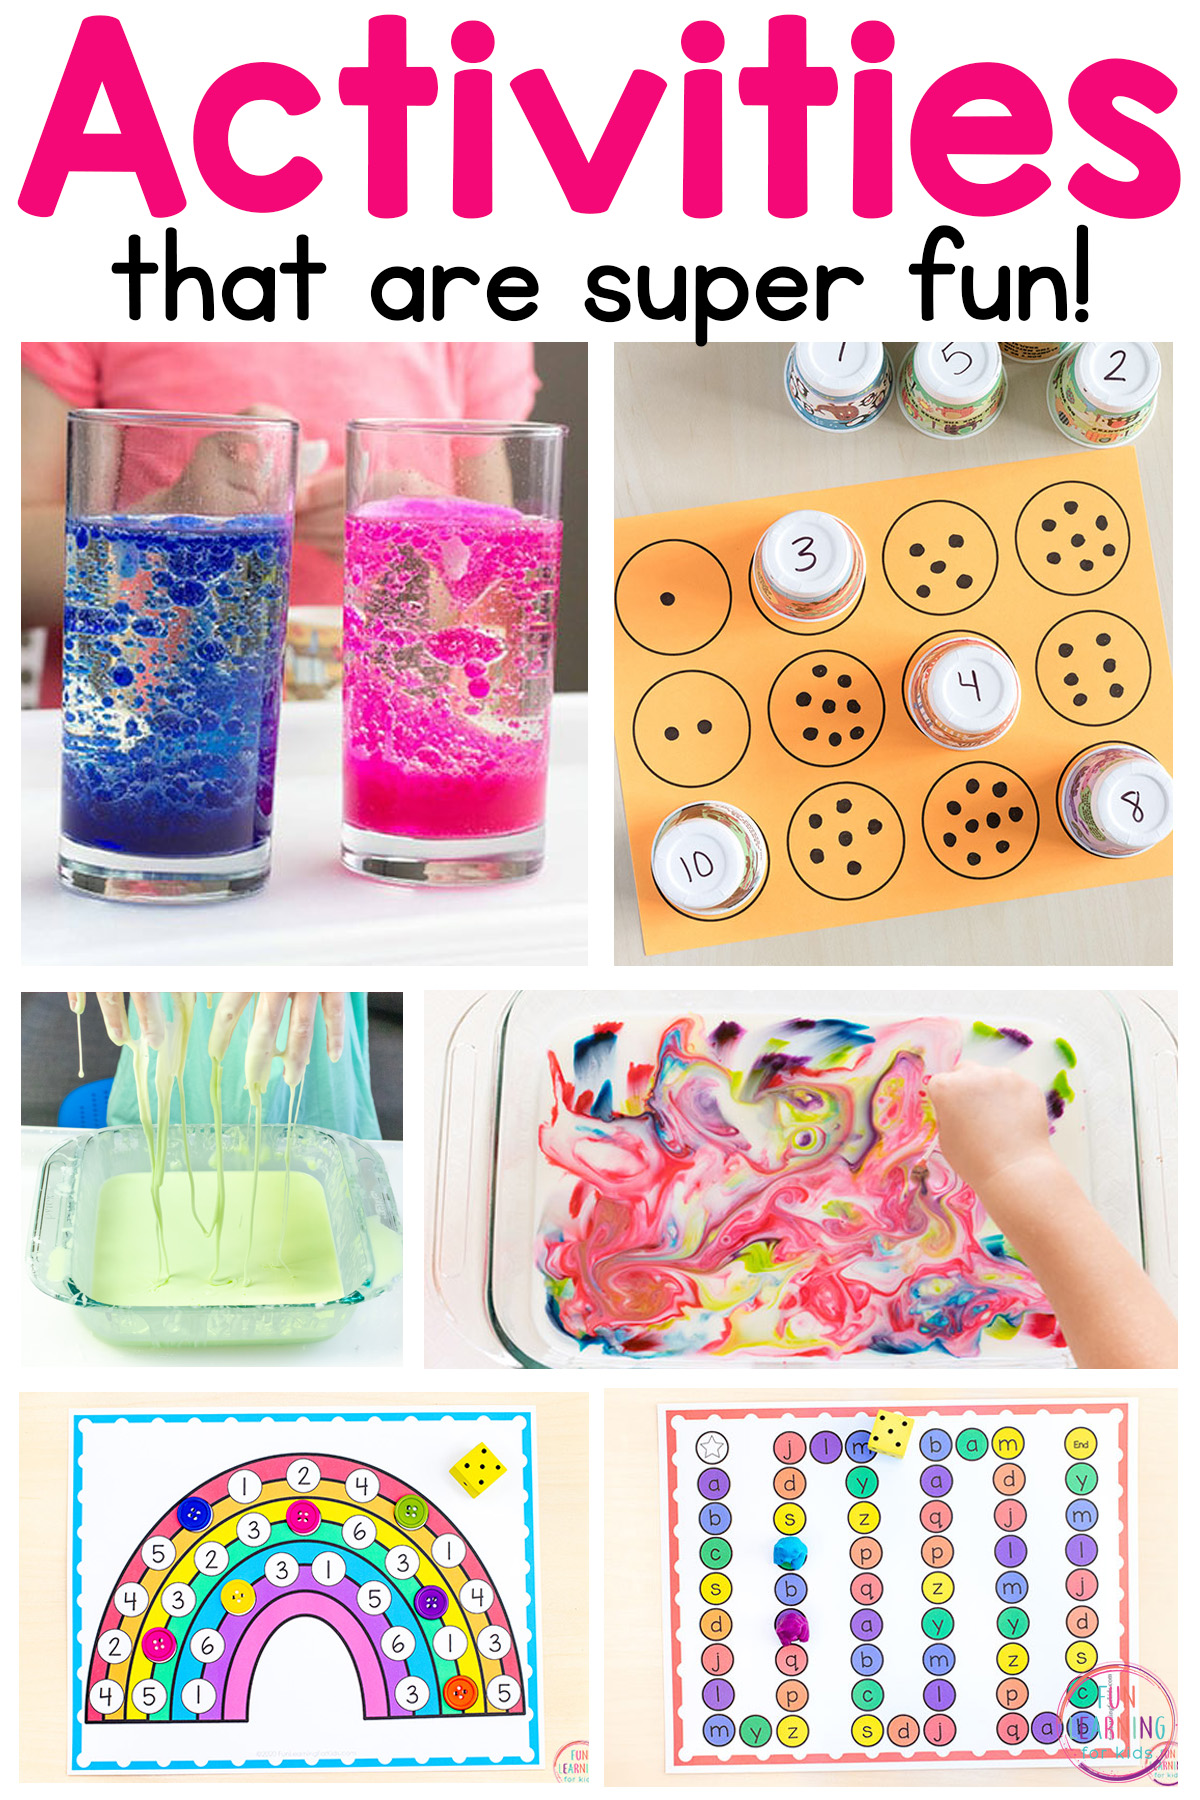 5-fun-and-educational-activities-for-kindergarteners-ages-5-6-to-enjoy